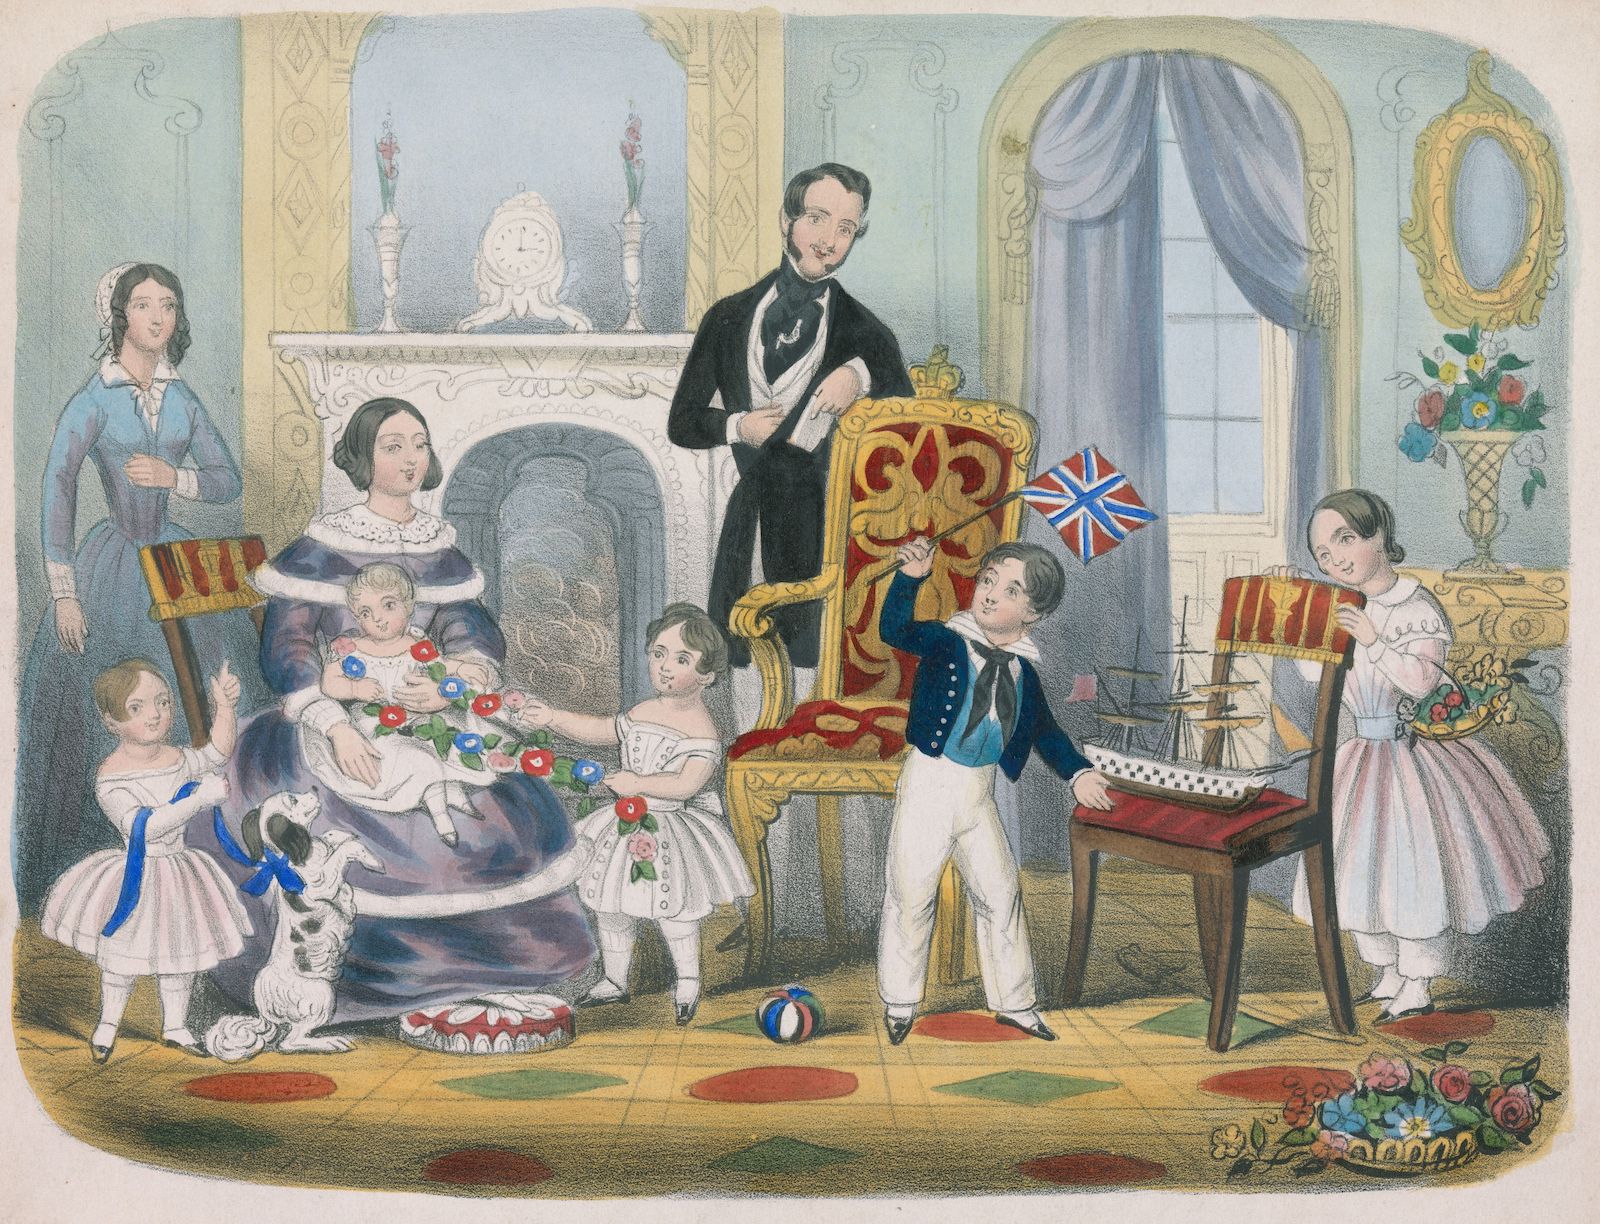 A domestic scene of Prince Albert and Queen Victoria in the nursery, c. 1845.  Yale Center for British Art. Public Domain.